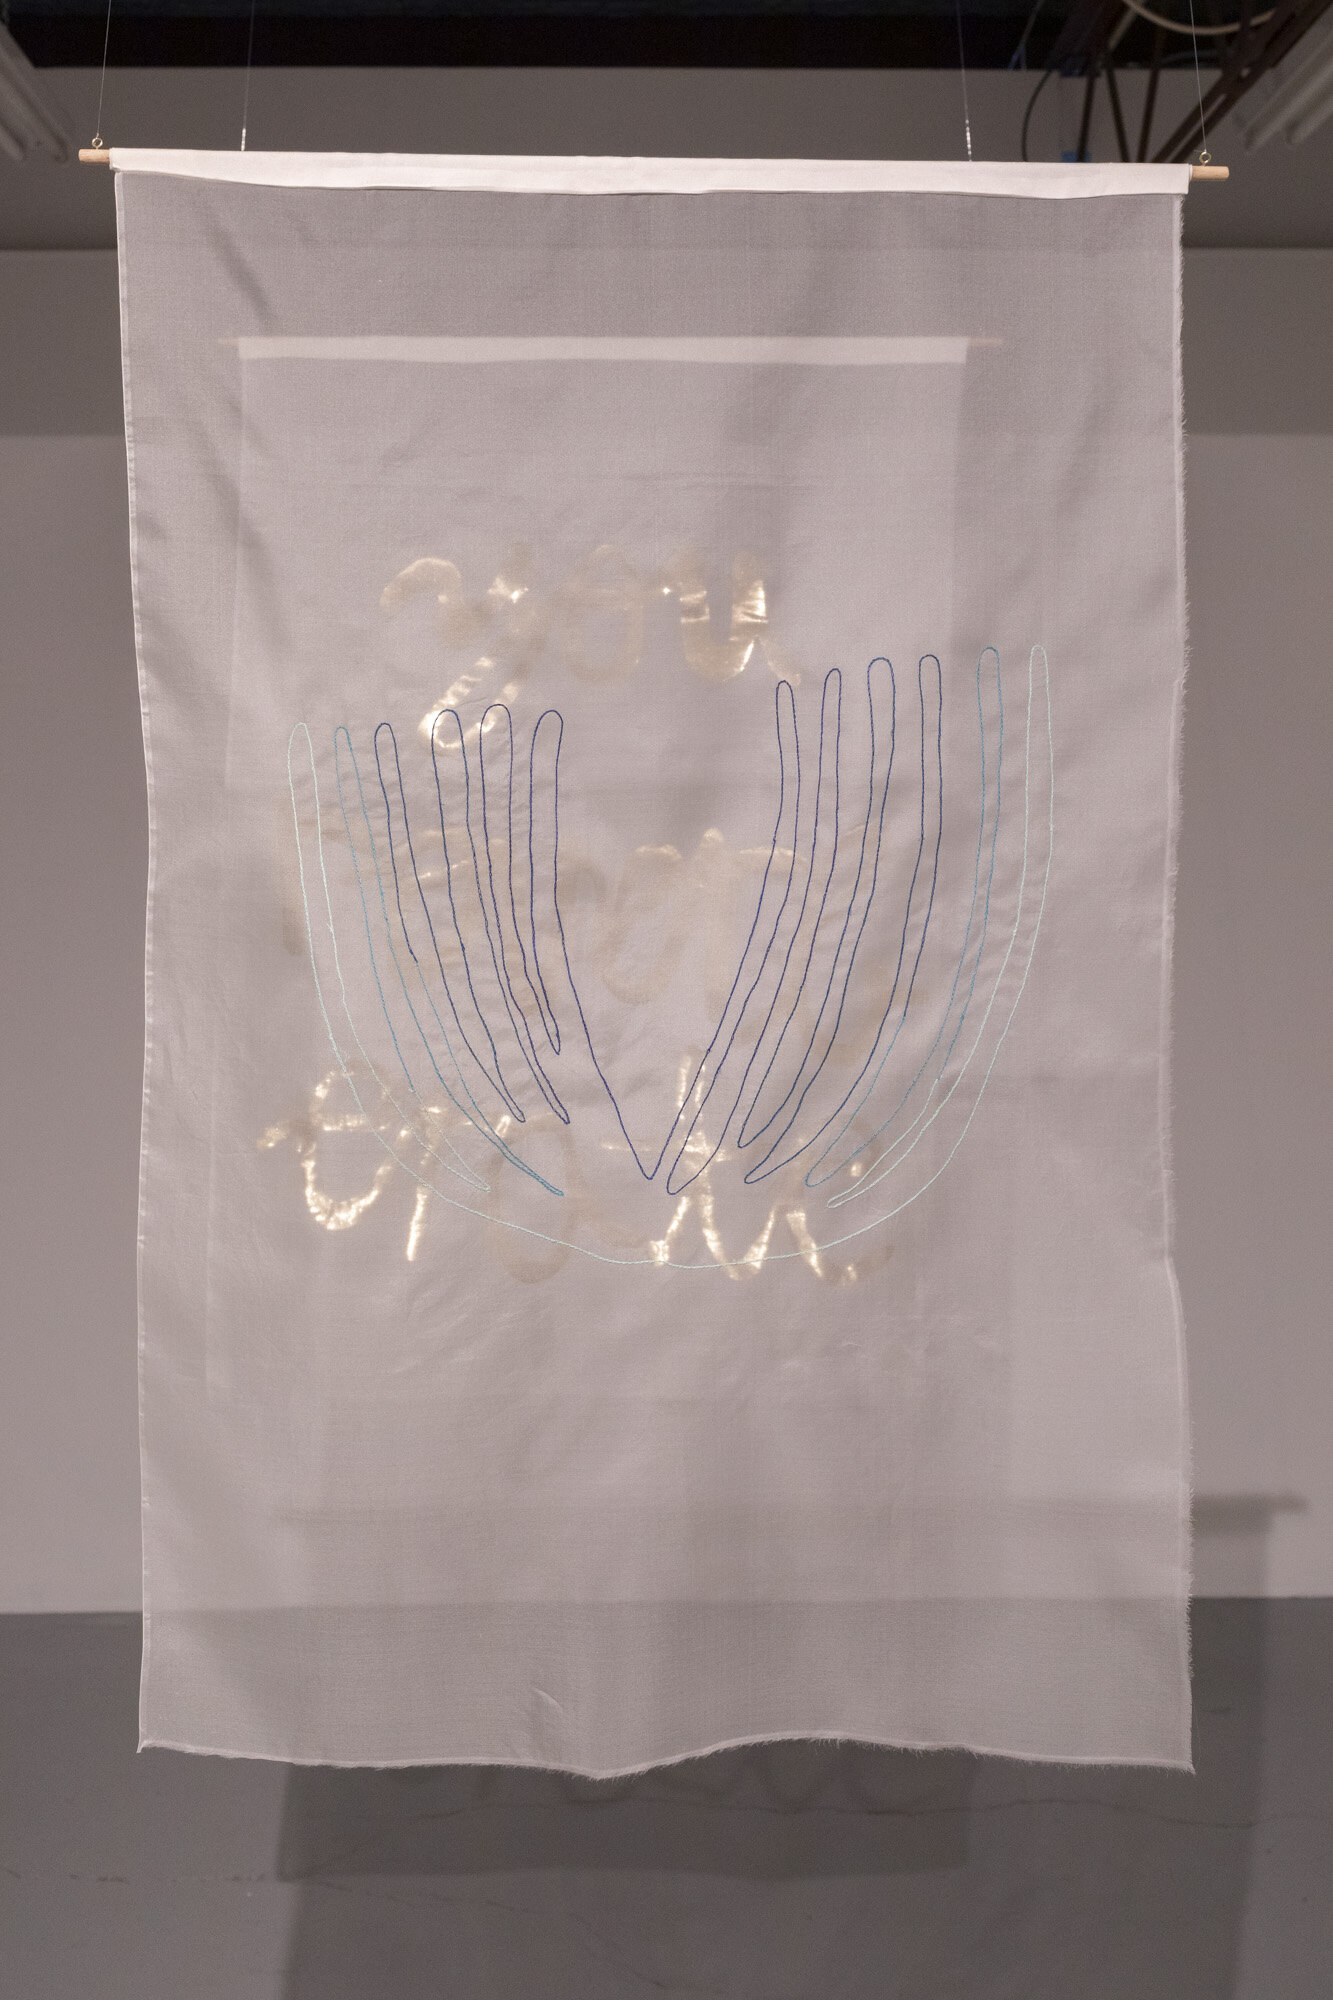   you reverberate   cotton hand embroidery on silk organza  (foreground) and appliqué gold lamé on silk organza (background) , 70cm x 100cm each June 2021 AIRspace Projects  Image:  Joy M Lai   